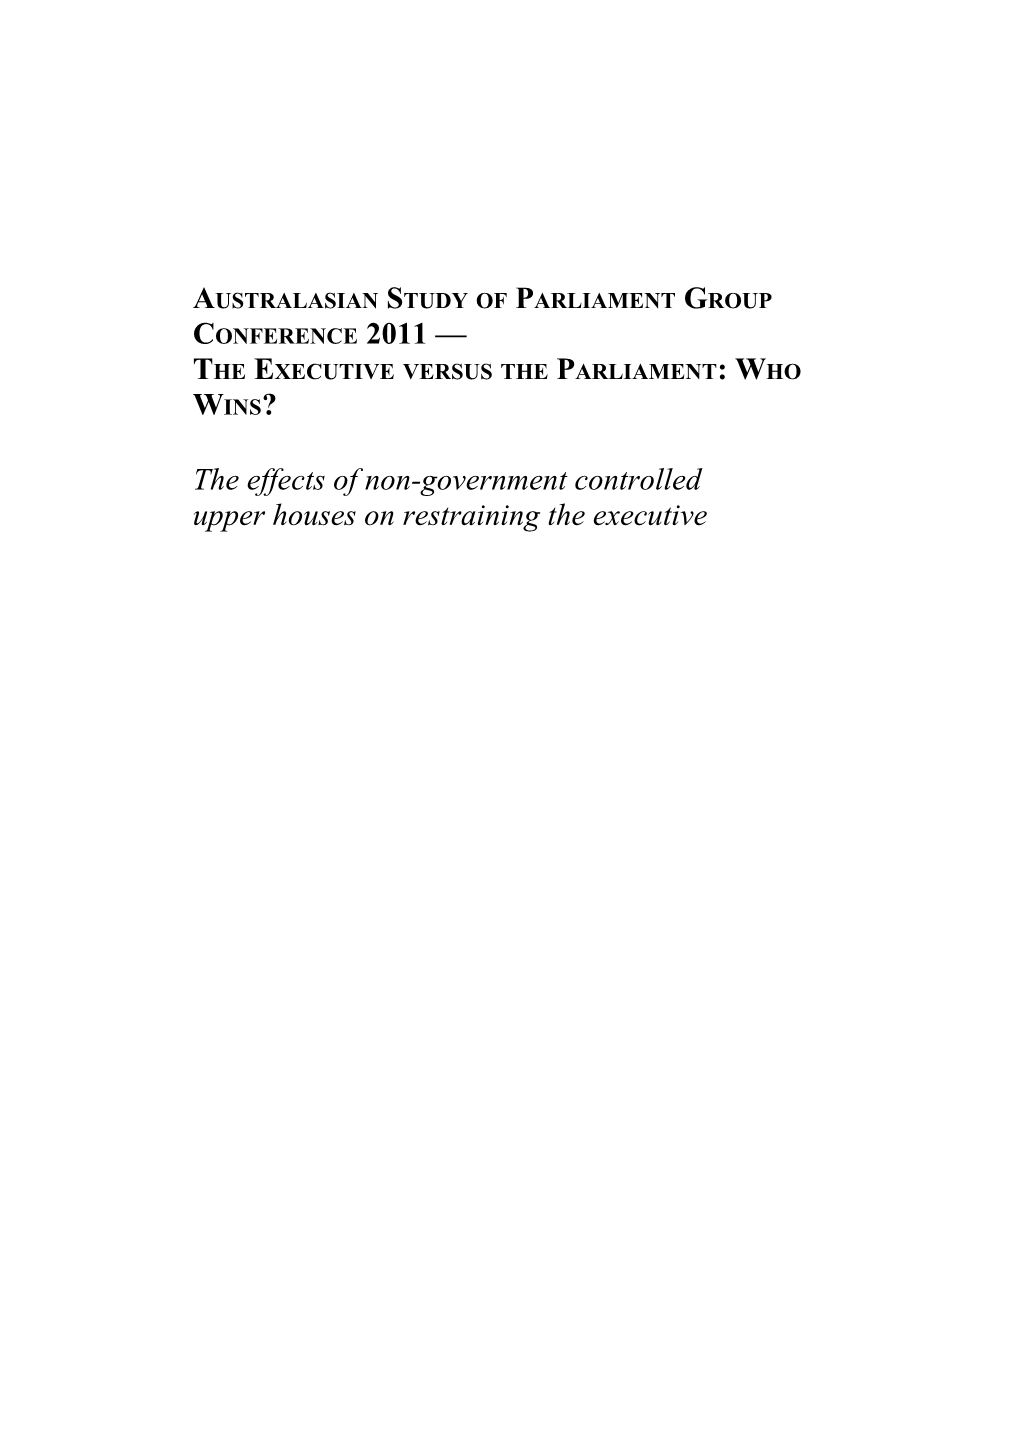 Autumn 2012 Impact of Multi-Party Government on Parliament-Executive Relations 111